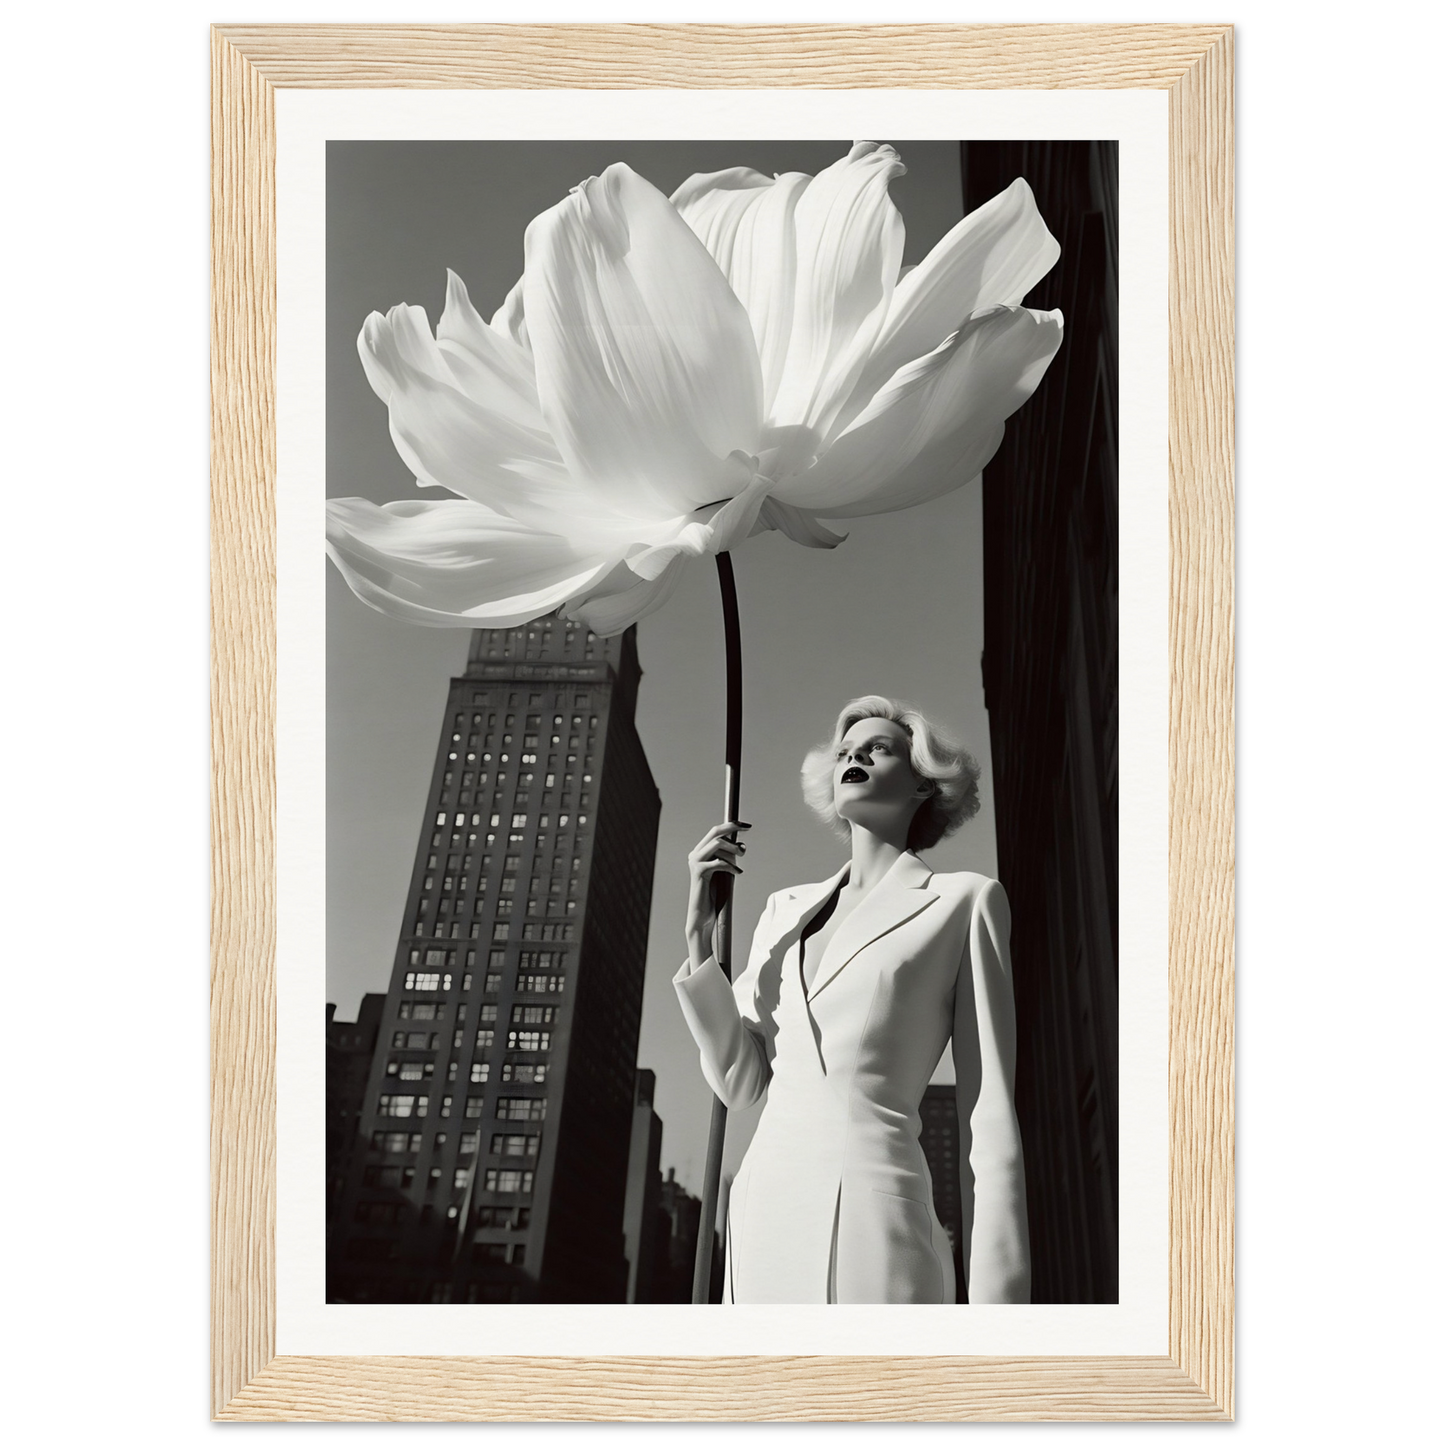 A woman holding "Flower And Glamour Girl A The Oracle Windows™ Collection" in front of a building, perfect for a poster for my wall.